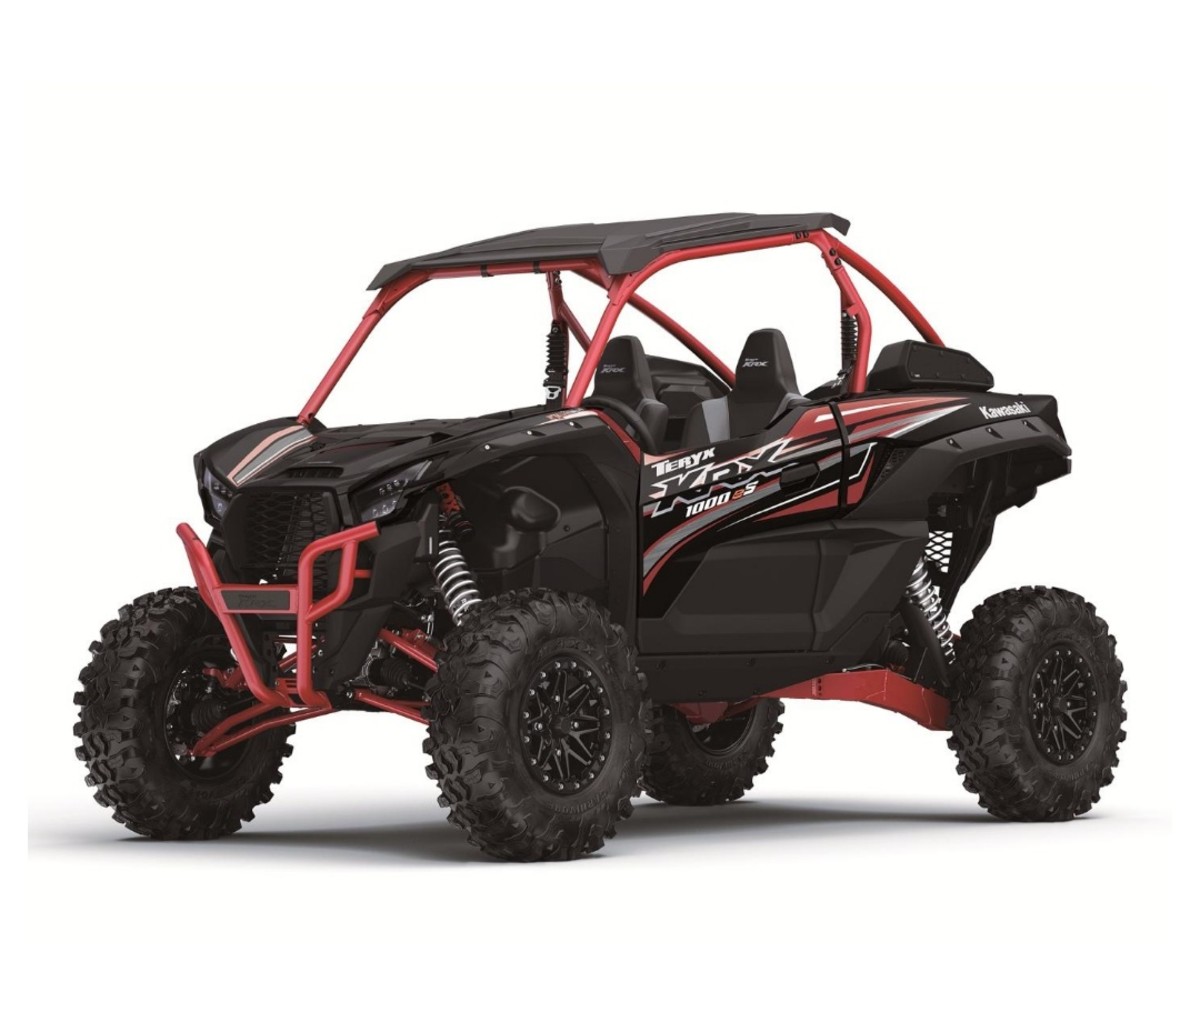 Kawasaki Teryx KRX 1000 eS in black and red on a white background. side-by-side UTVs